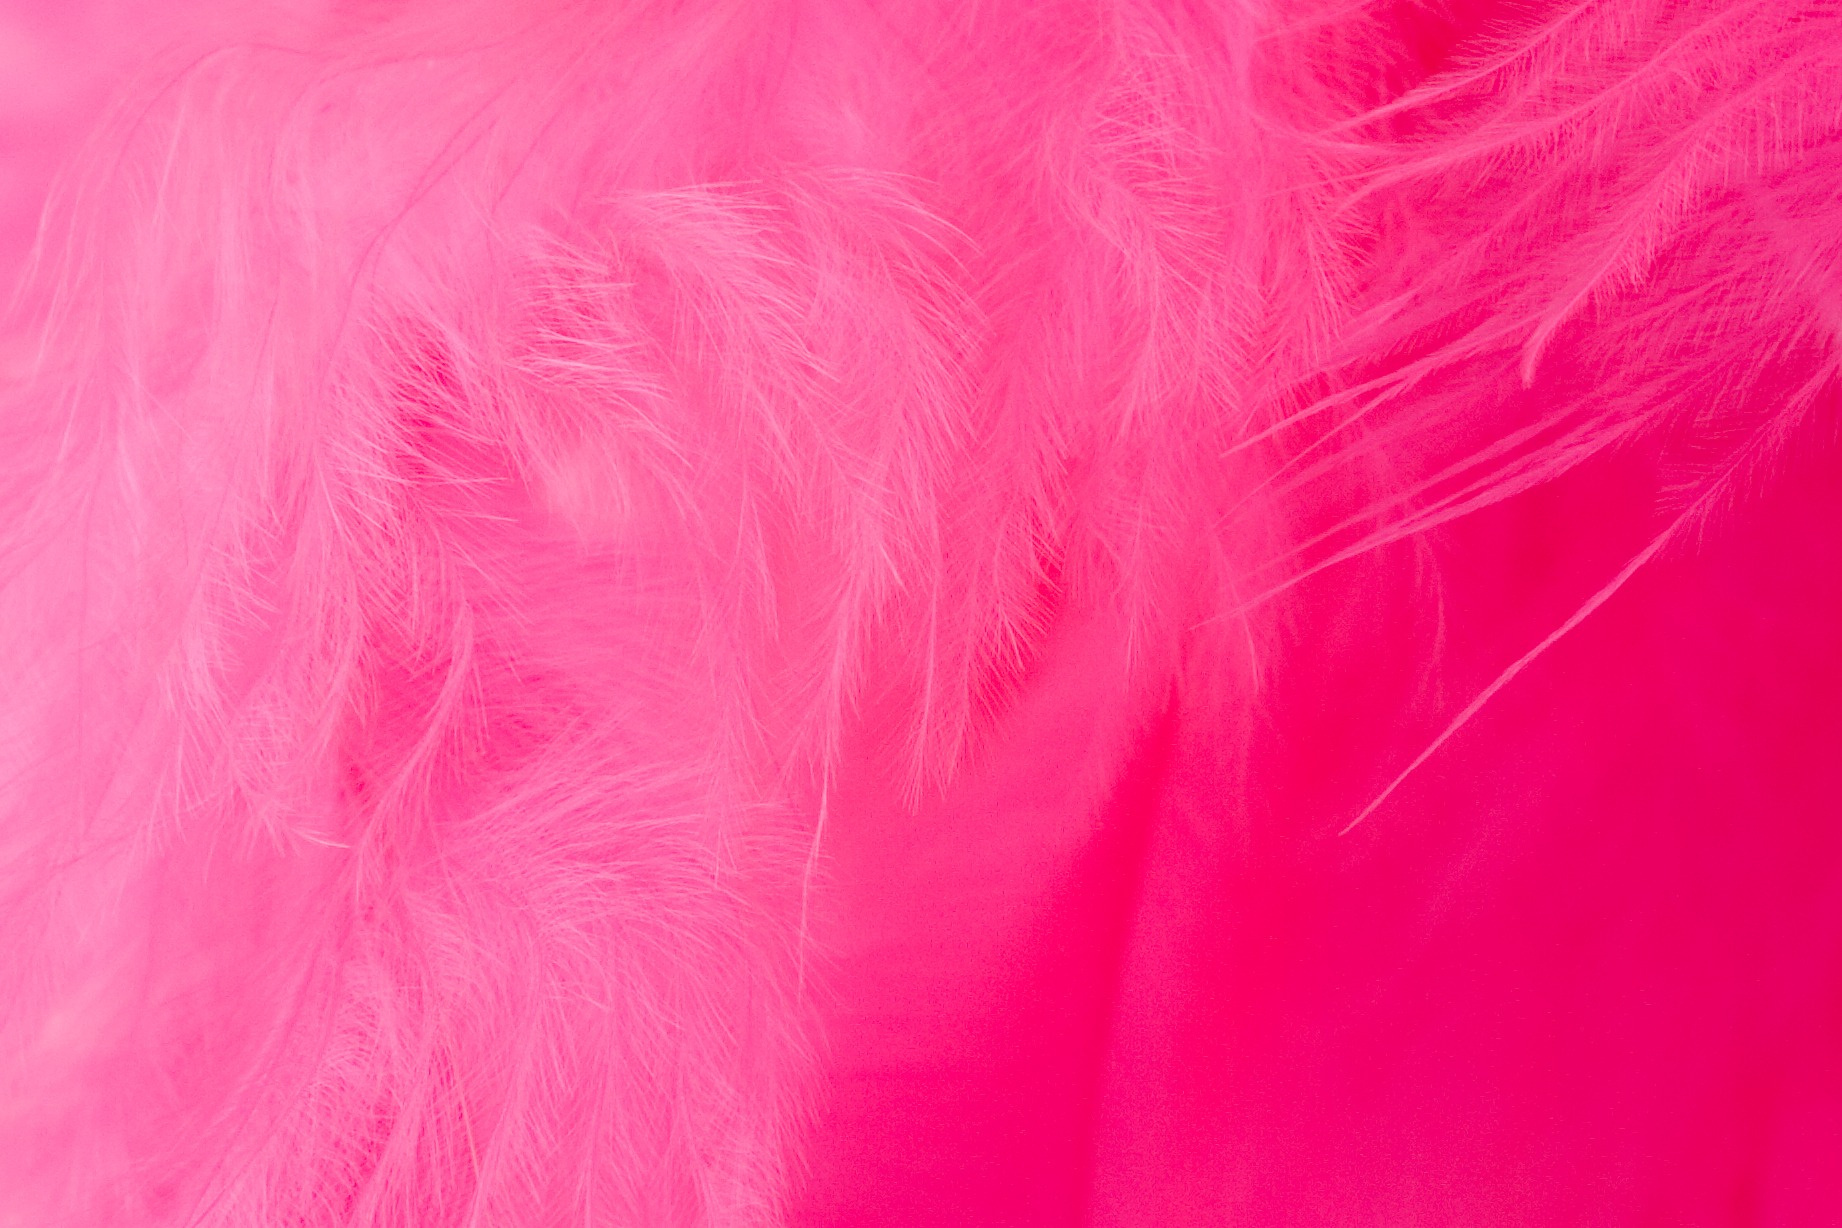 Soft Feathers on Pink Fabric